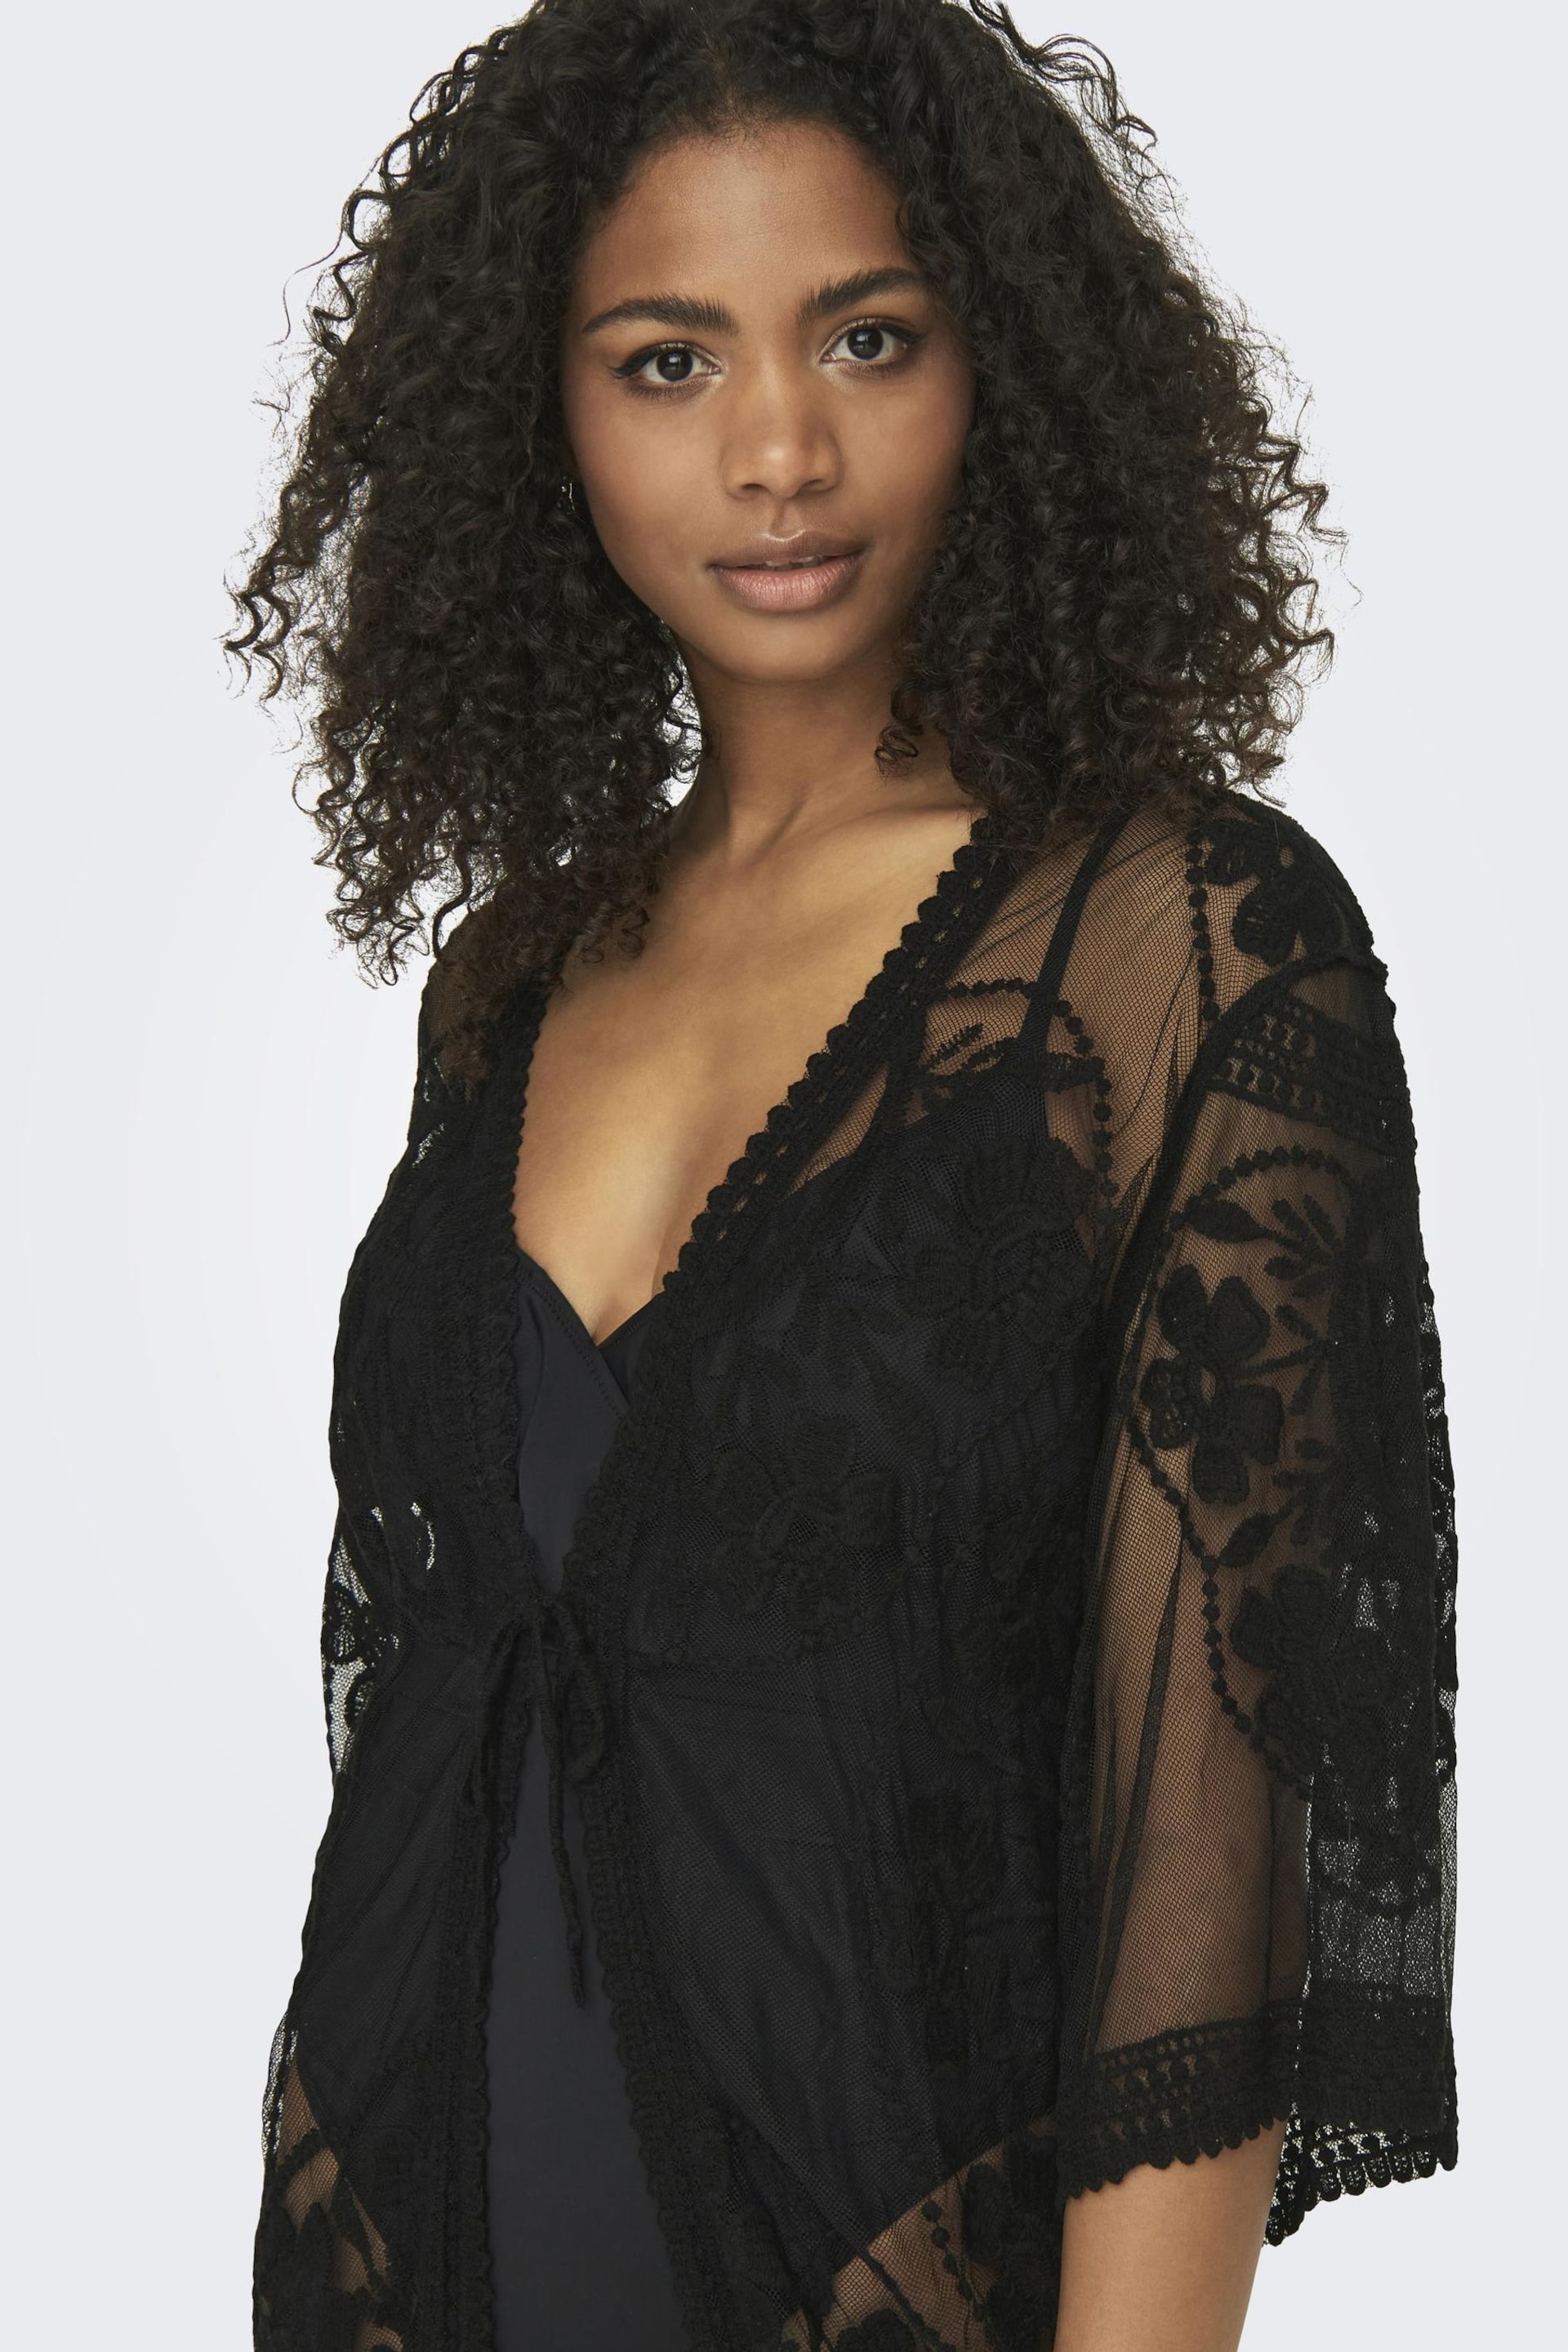 ONLY Black Embroidered Maxi Beach Cover-Up Kaftan - Image 5 of 7